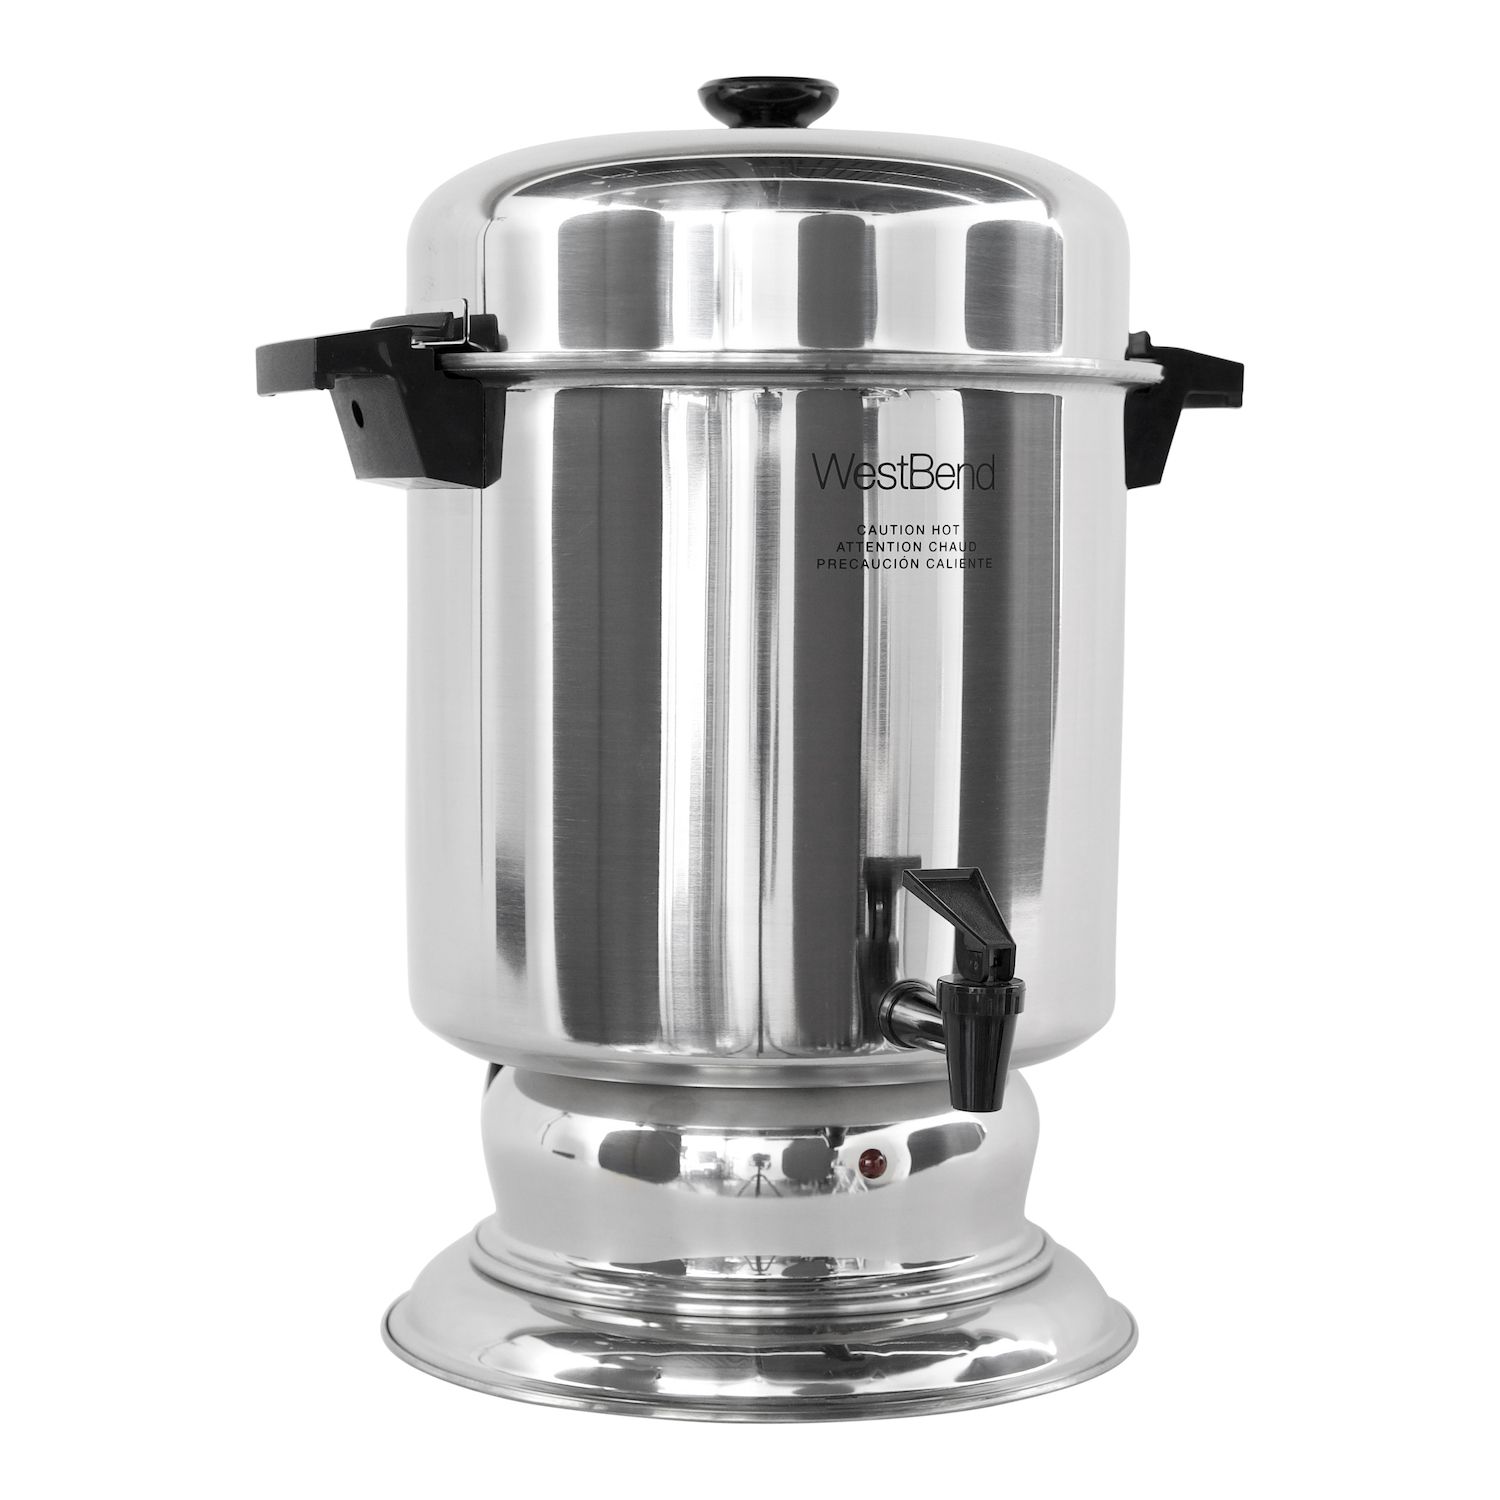 Elite Gourmet Stainless Steel 40 Cup Coffee Urn and Hot Water Dispenser 